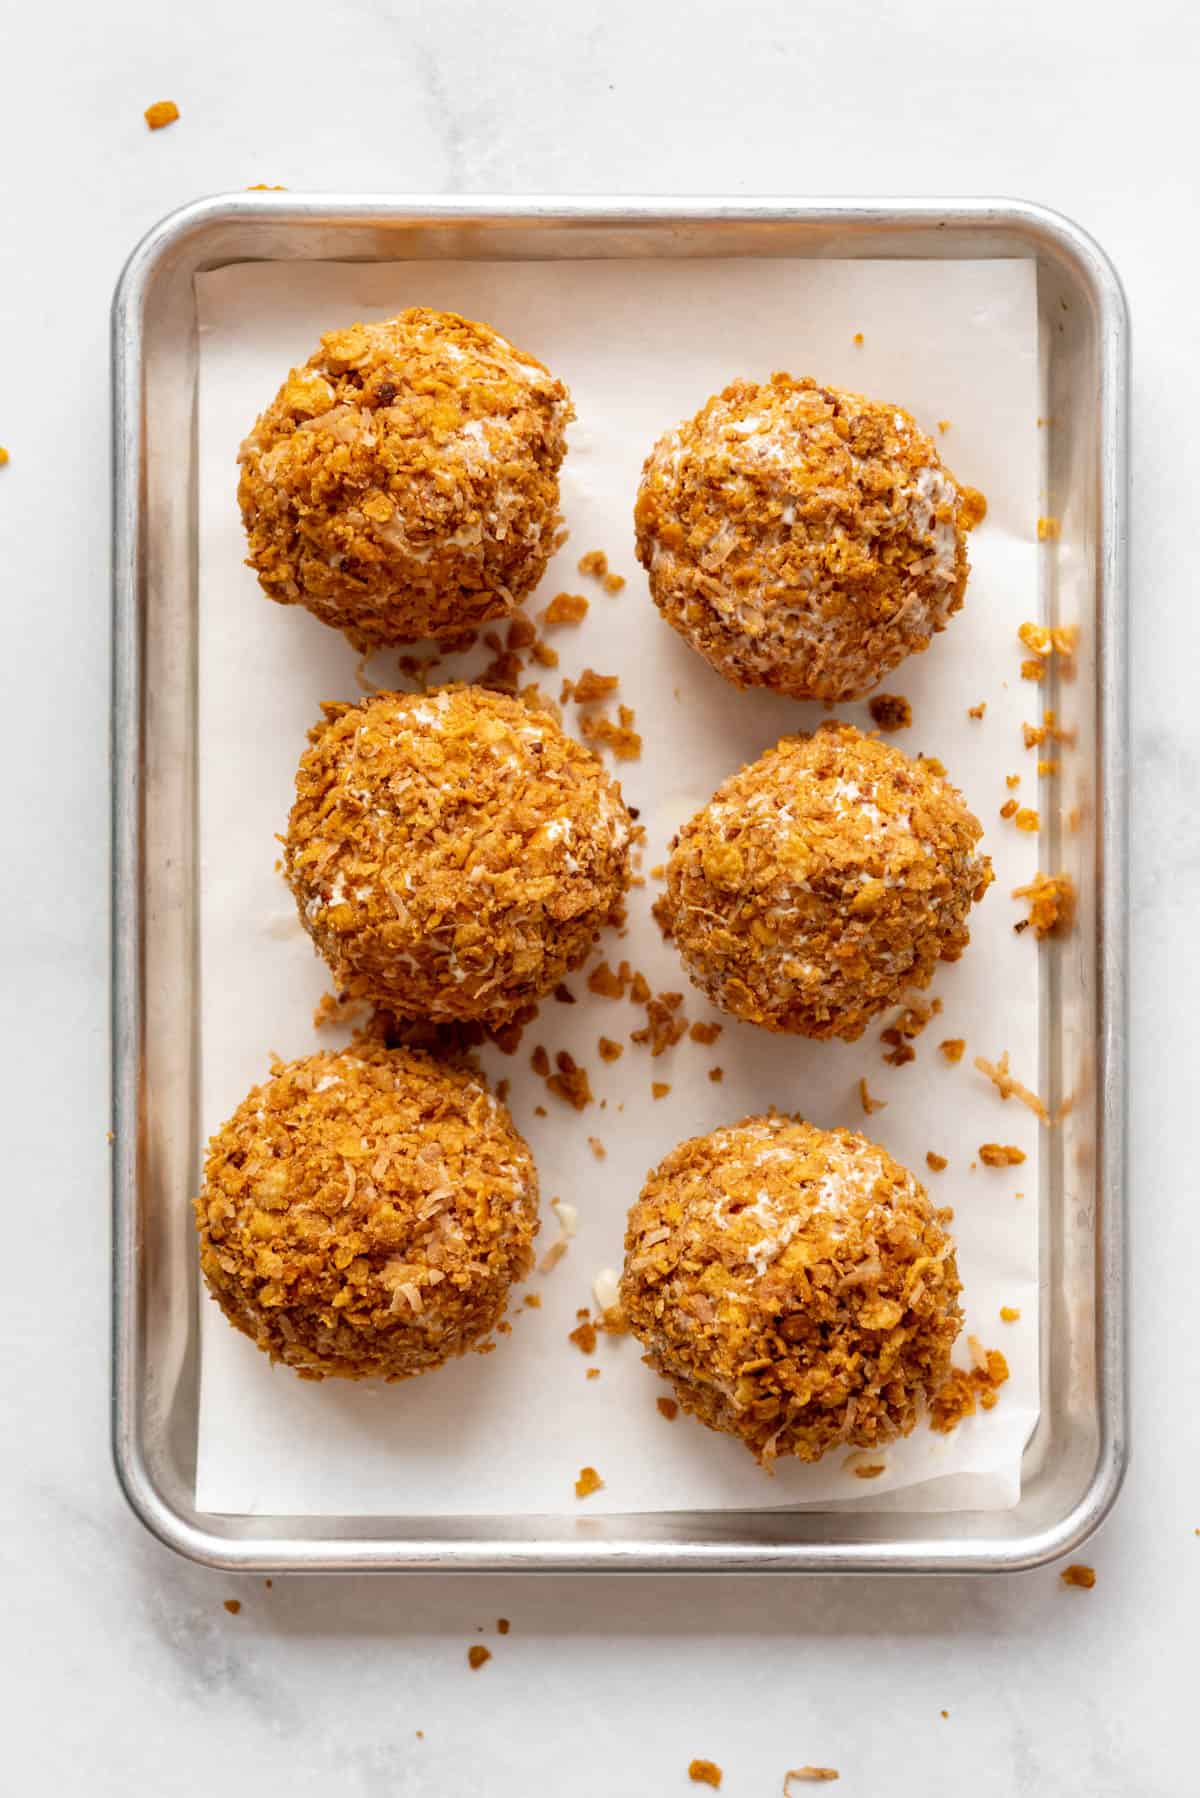 Six fried ice cream balls on a cookie sheet.